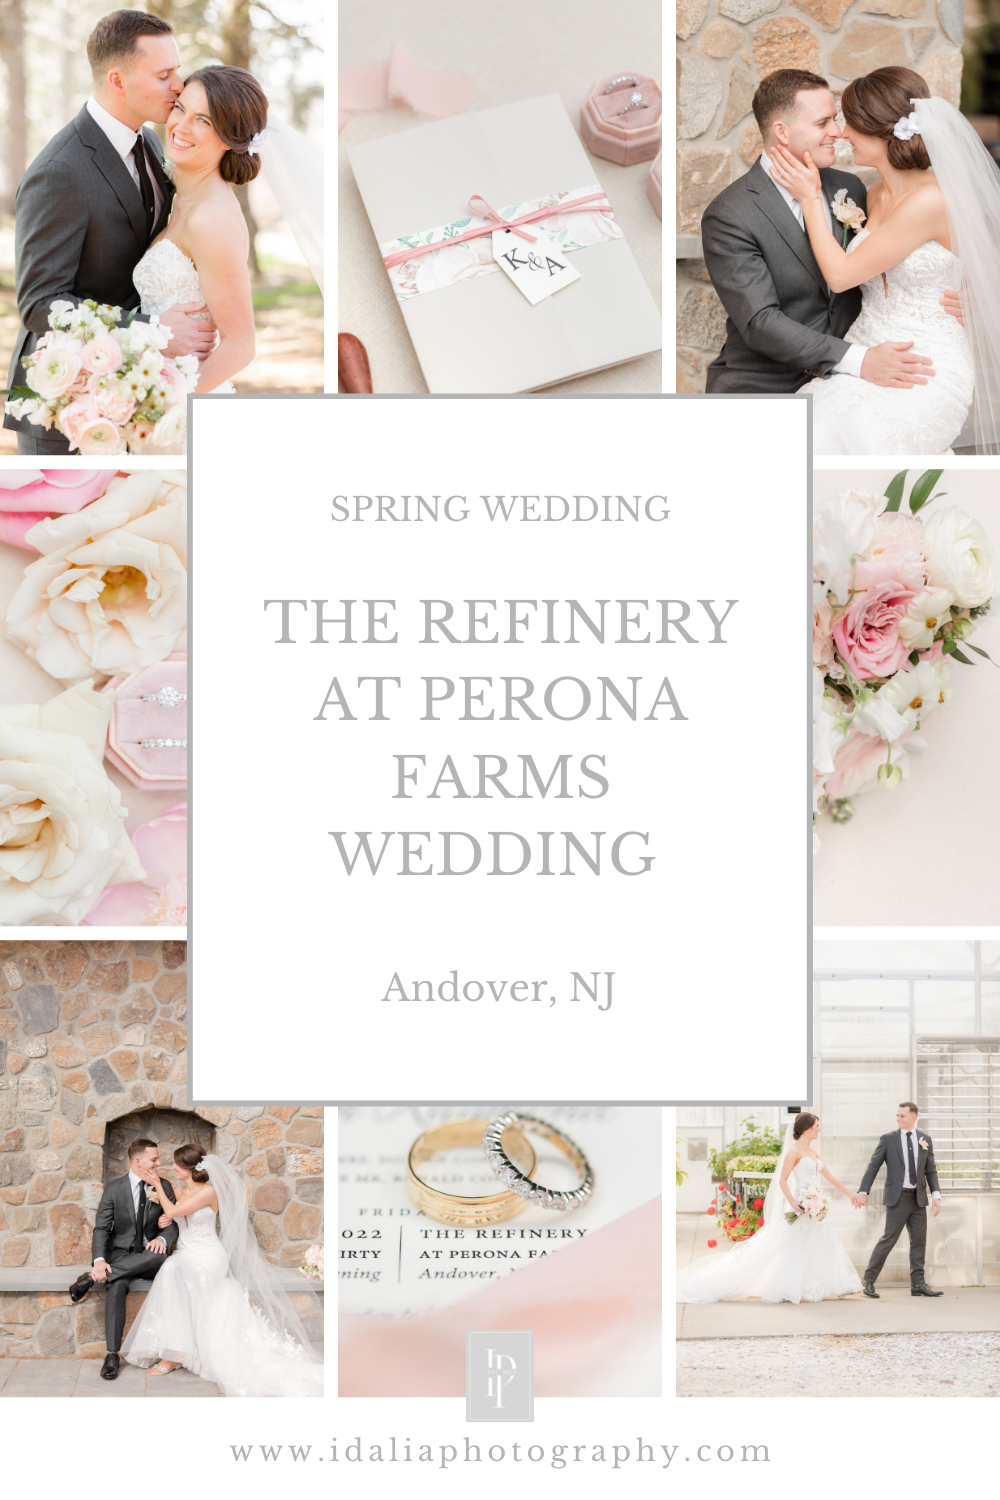 The Refinery at Perona Farms wedding with industrial vibe and spring color palette photographed by NJ wedding photographer Idalia Photography